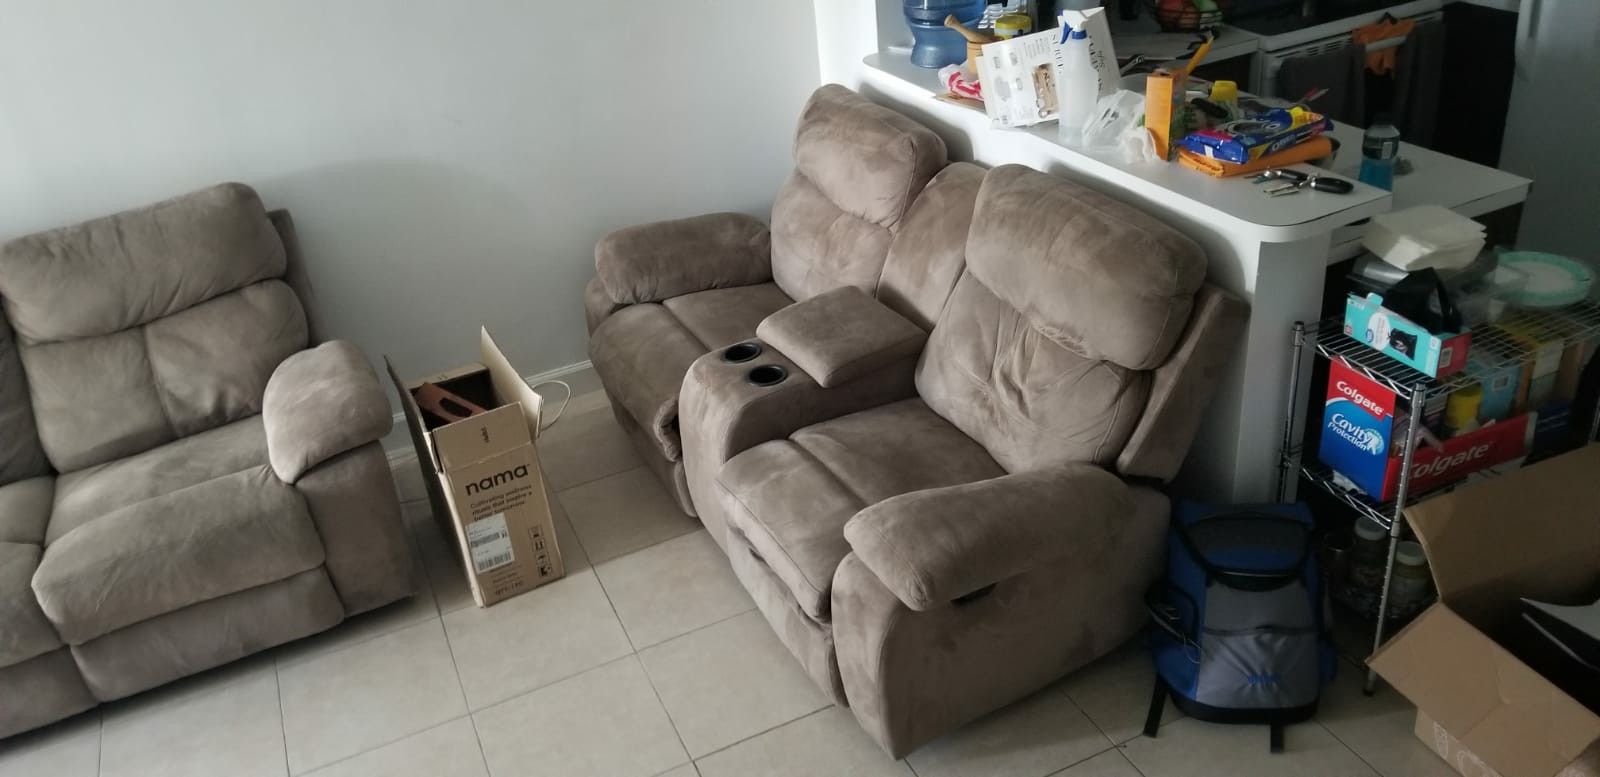 Reclining sofa / couch set - need to sell ASAP